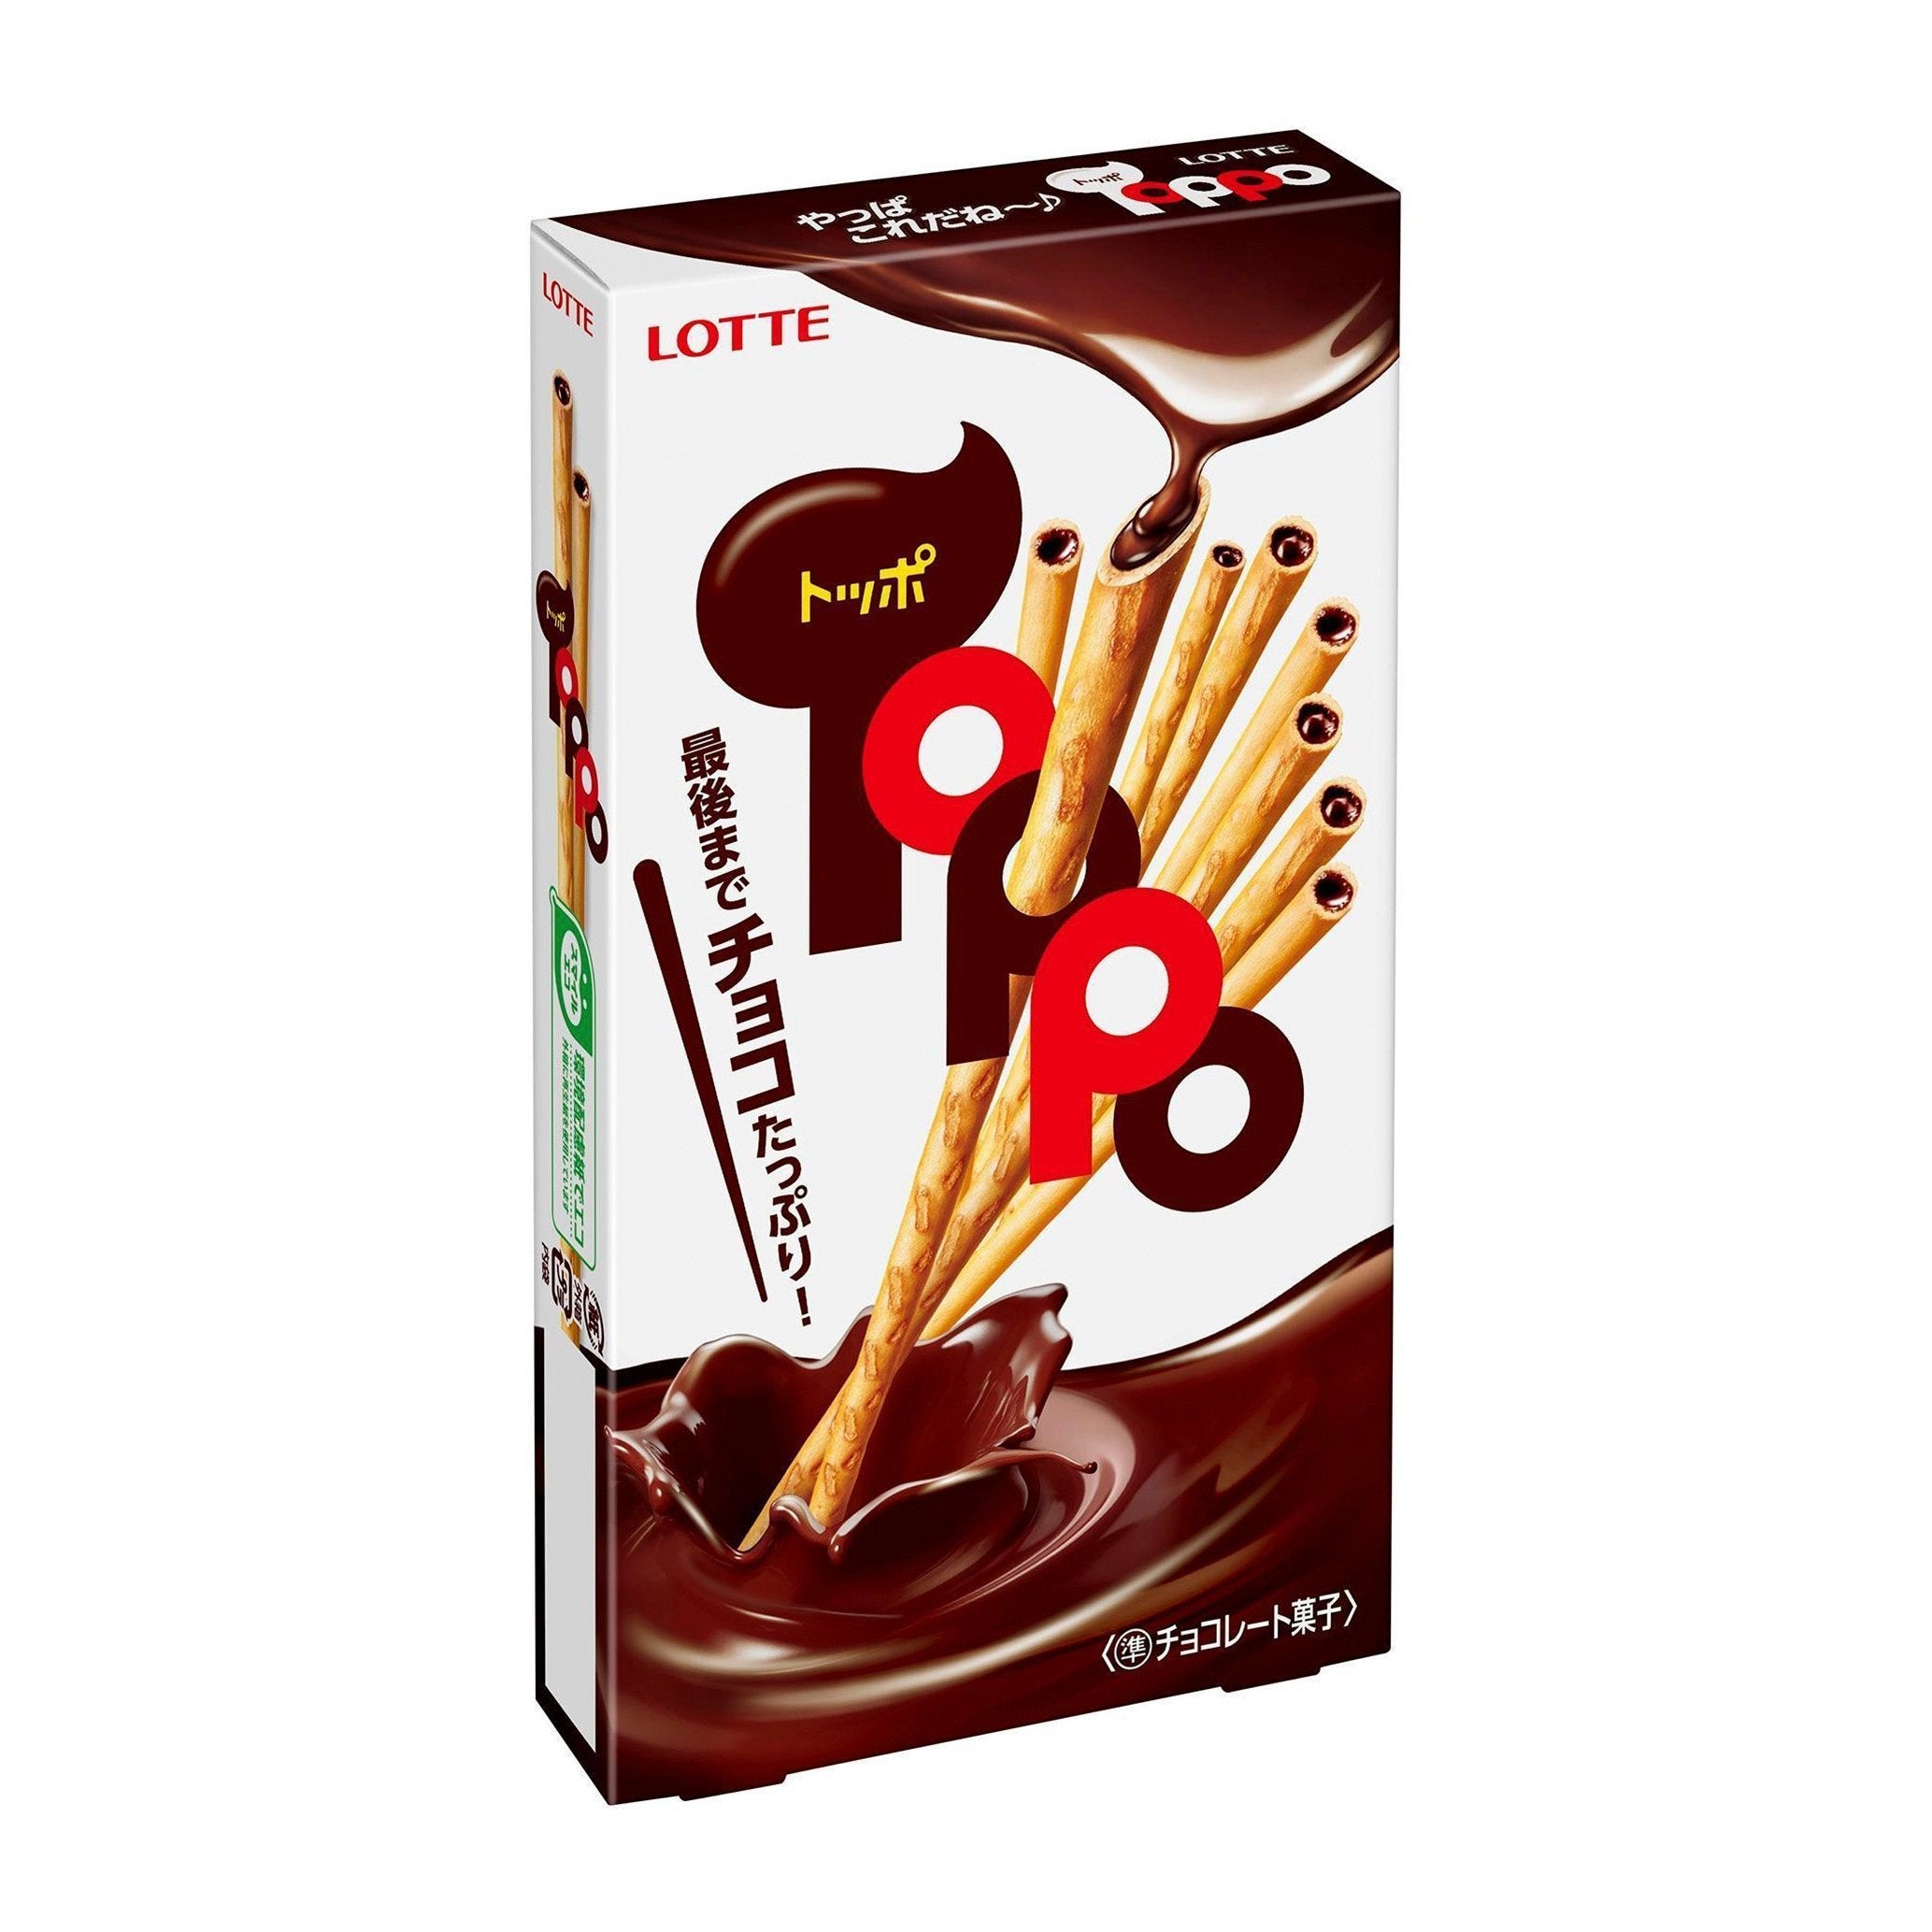 Lotte Toppo Chocolate-Filled Pretzel Sticks Snack (Pack of 5)